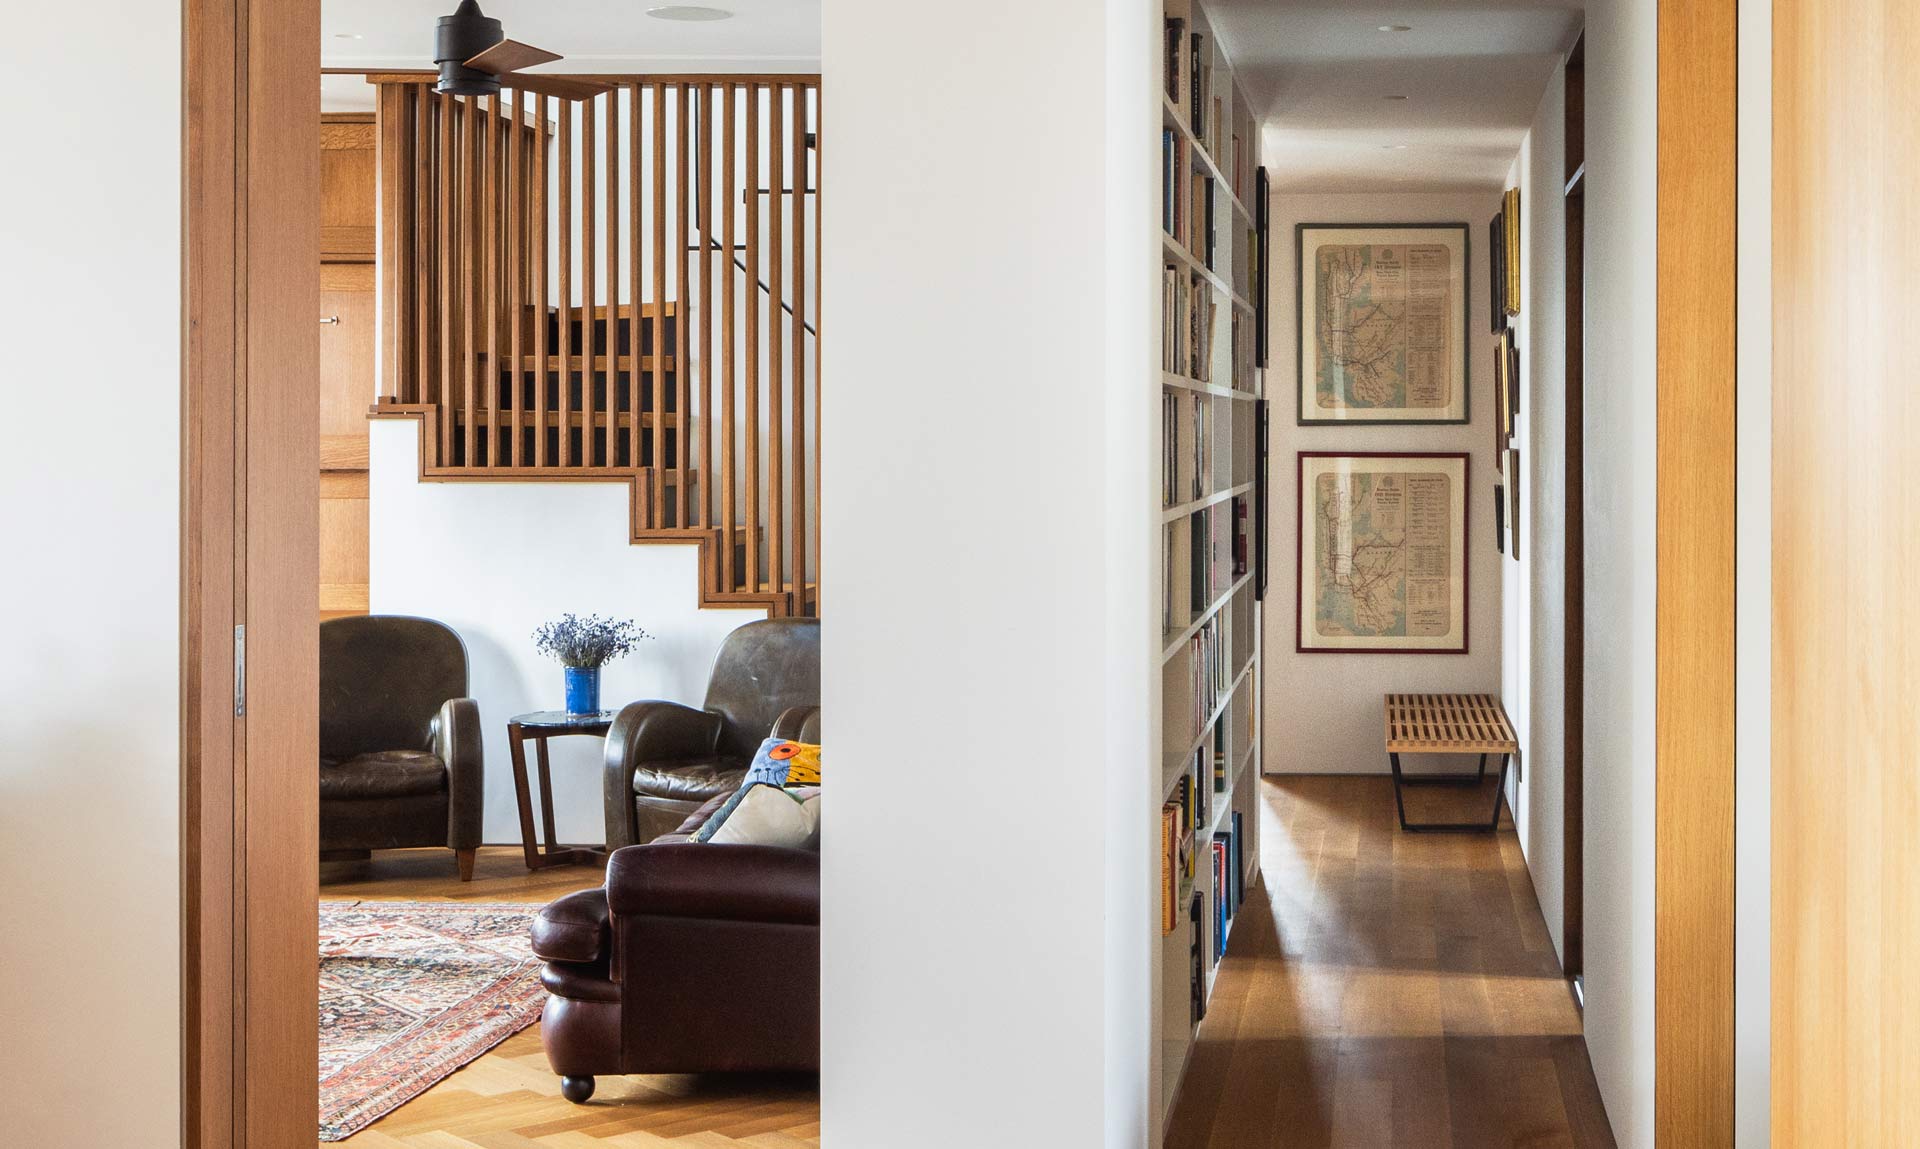 craftsman living room and hallway in morningside heights nyc apartment renovation